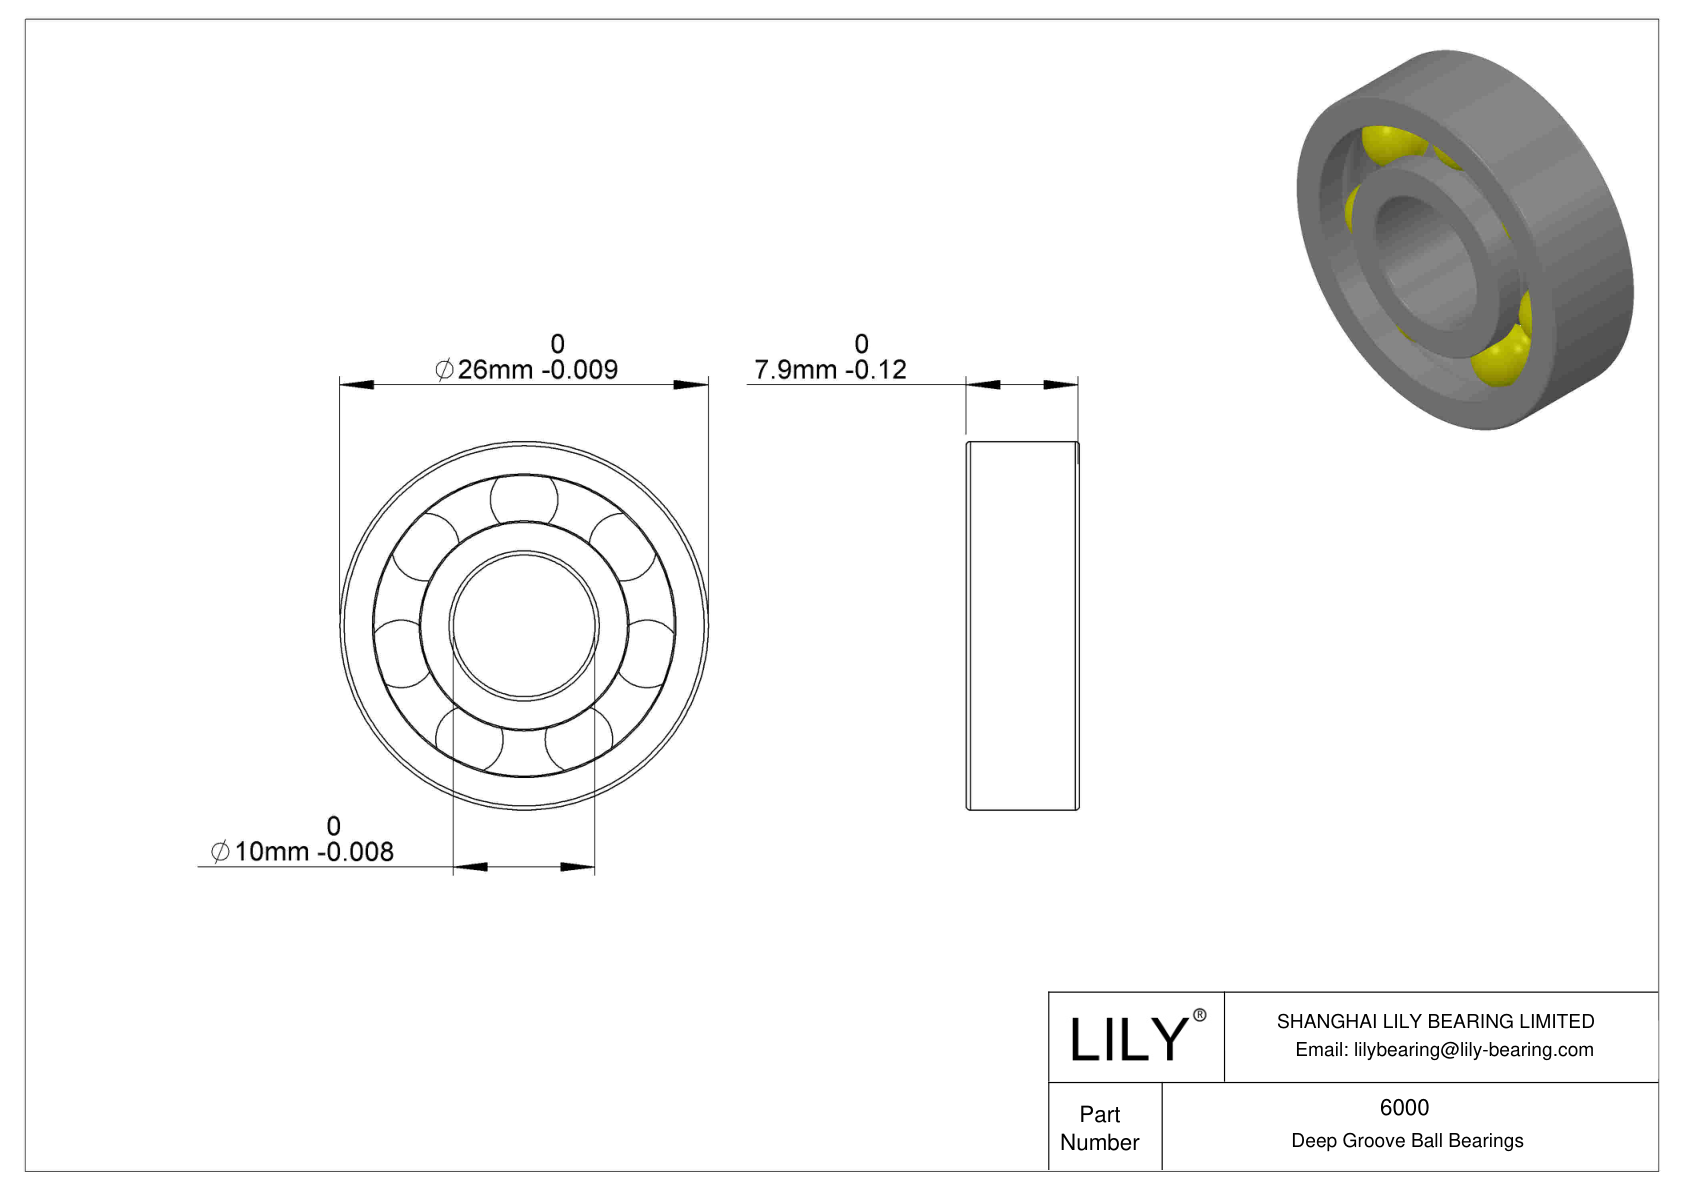 LILY-BS600040-10 POM Coated Bearing cad drawing